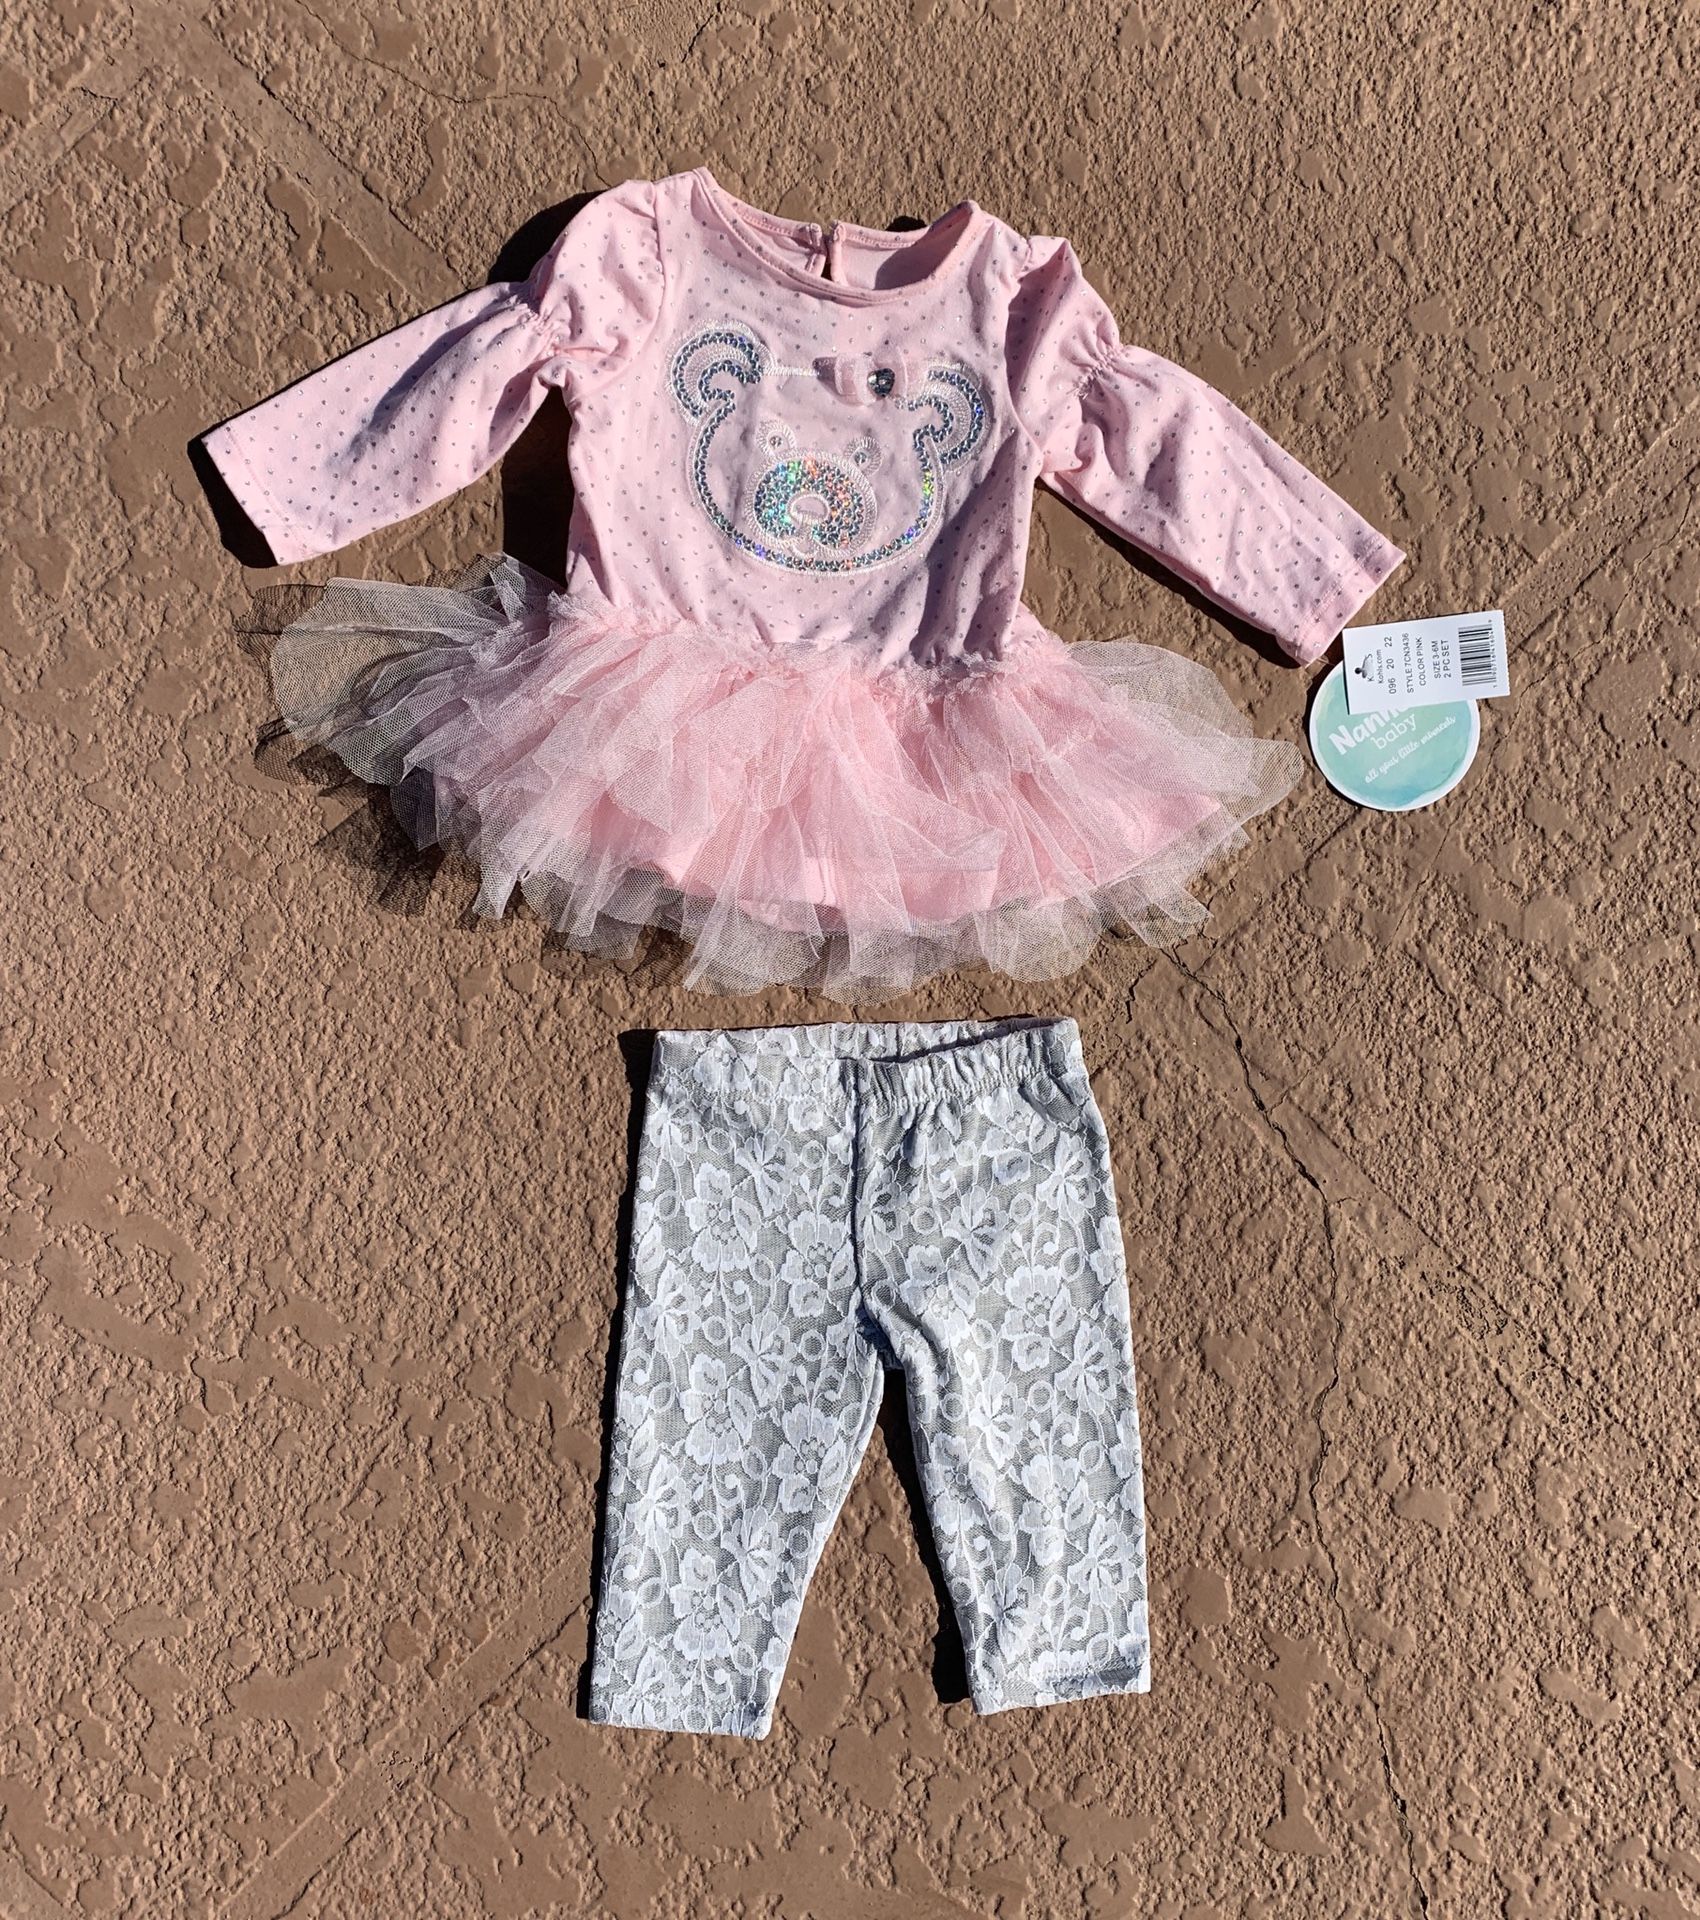 Brand new Nannette Baby sparkly 2-piece outfit, size 3-6 months